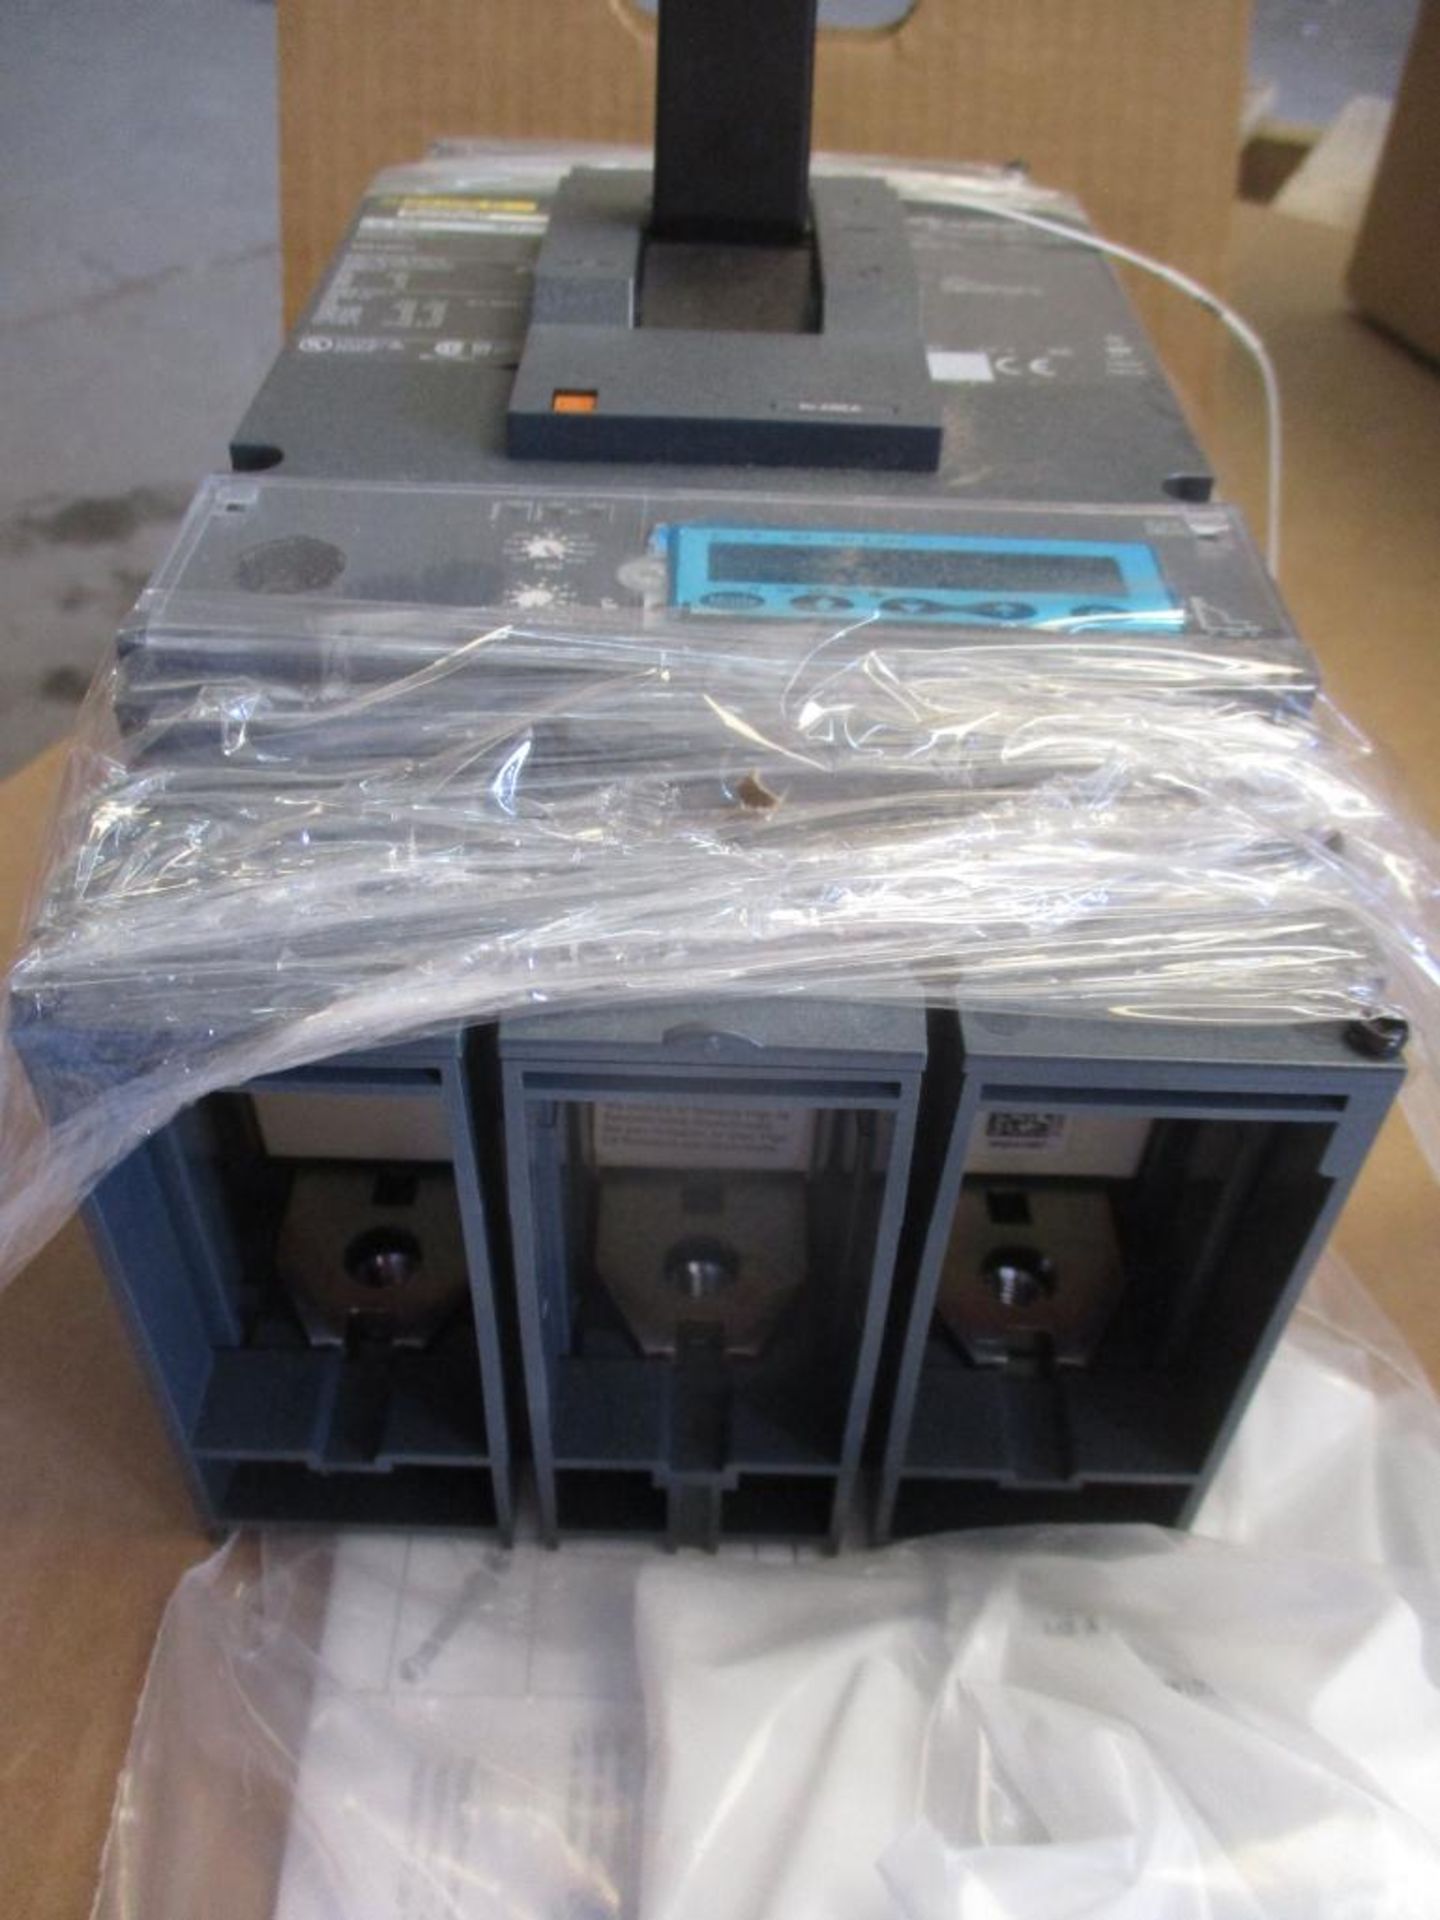 Square D 400 AMP Circuit Breaker, 556149P2, 400A, 3P, 600VAC, PowerPacT LG 400 (New in Box) - Image 3 of 4